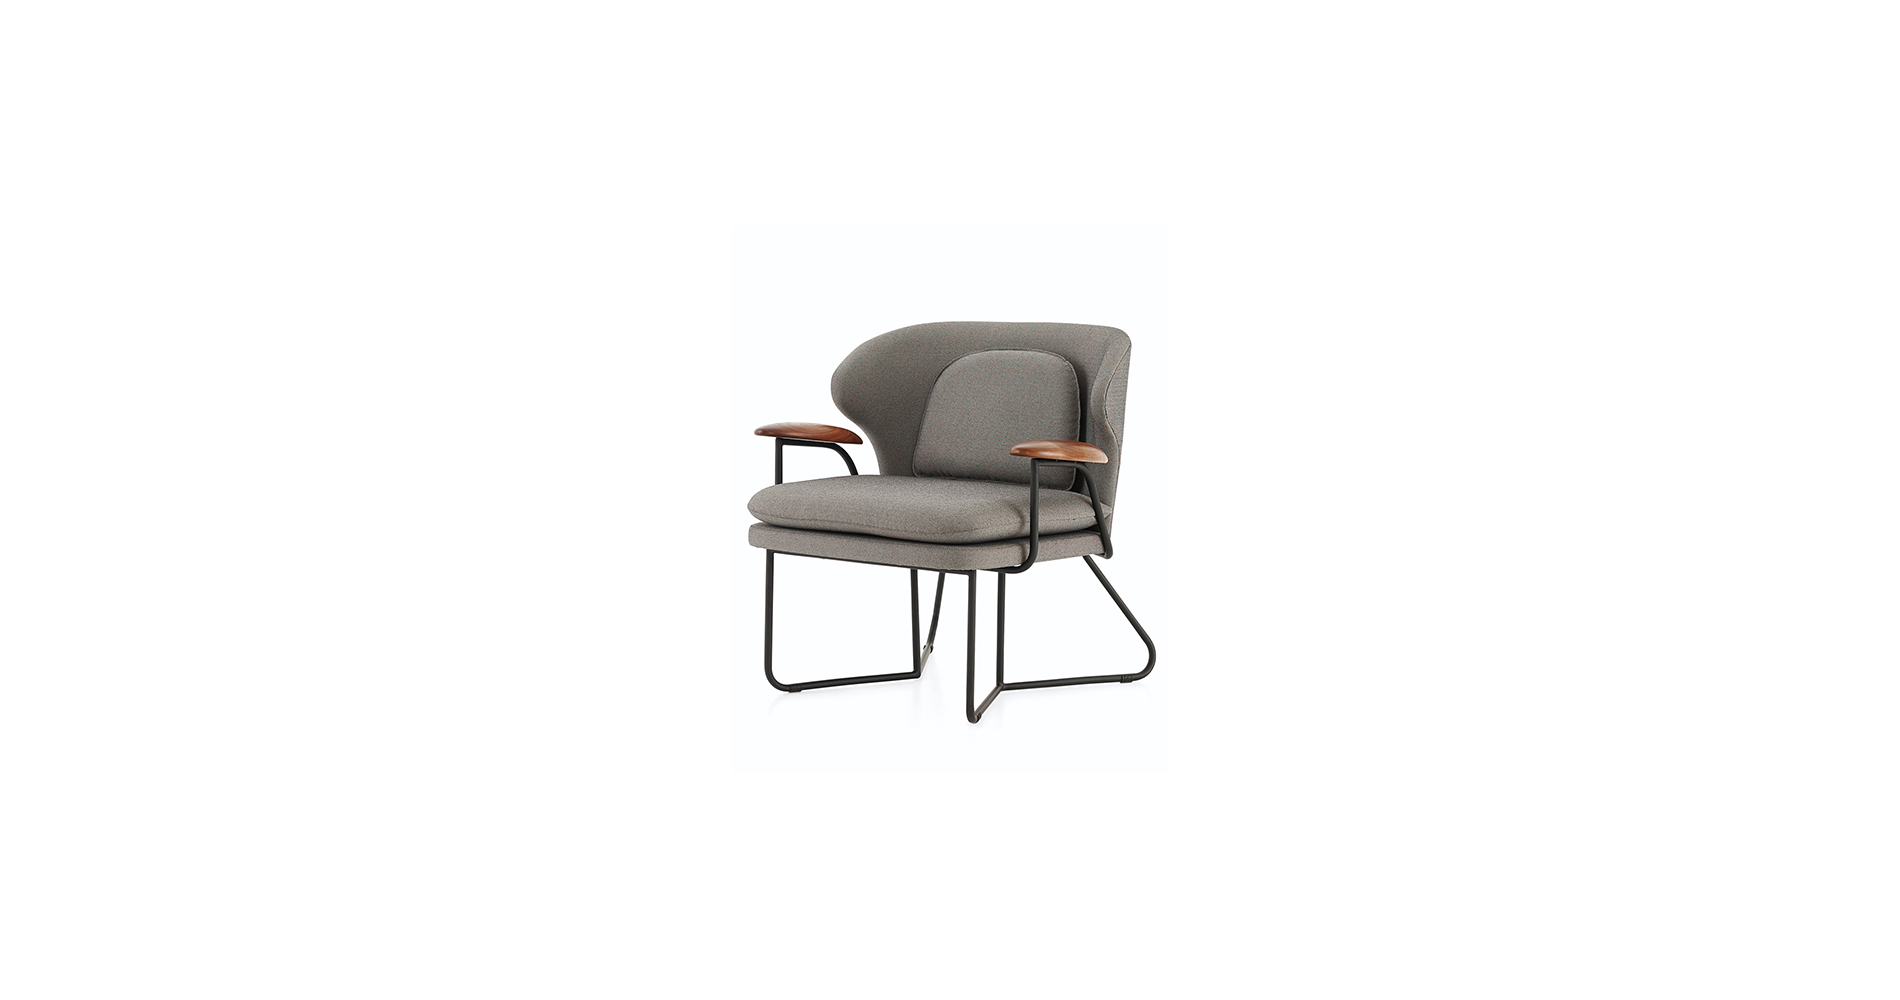 An image of Chillax Lounge Chair